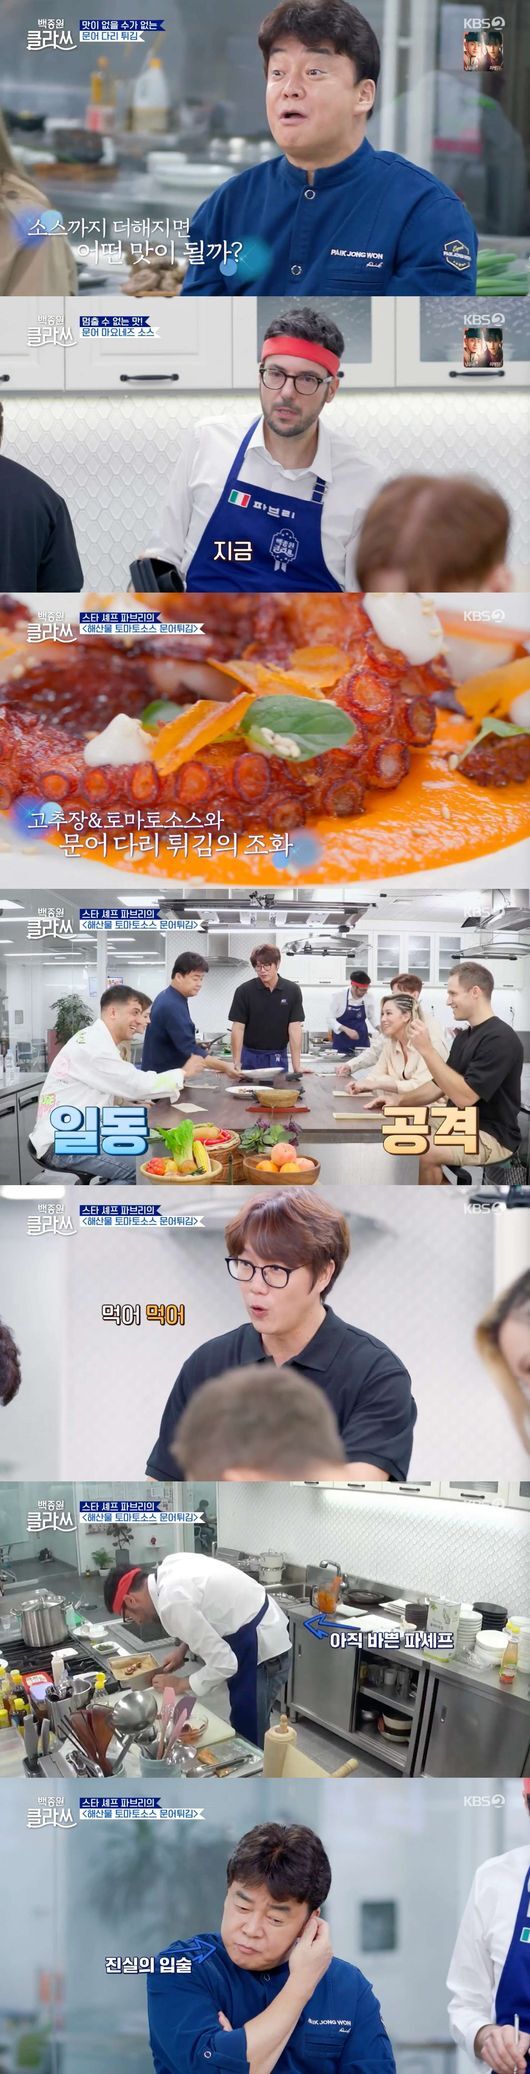 While cooking research has enjoyed the last dinner with the first Korean newcomers, Baek Jong-won has been honest about why he was late for his wife Sooo-jin and marriage.On the afternoon of the 4th, KBS 2TV Baek Jong-won Clath depicted the Baek Jong-won and Sung Si-kyung who held a delicious thank-you party for global newbies.On this day, Baek Jong-won Clath Baek Jong-won visited the Baek Jong-won research and development room, which is the space where the first Korean newbies and their own special recipes are born.Ill make you a special dish for you whove been struggling for a while, its a party of comfort, Baek Jong-won said.Baek Jong-won Clath Baek Jong-won said, When I meet a lot of foreign people and ask about Korean, which is the most memorable.I will let you know the stir-fried ssamjang which is an upgrade of stir-fried red pepper paste.The second dish is to try Stir-Fried Pork with Chicken for those who do not eat pork. Baek Jong-won Clath Baek Jong-won and Sung Si-kyung directed Matthew, who prepared Apple pie for him, Matthew is good at cooking and Cake is good at baking.Its the best grooming, he said, praising Matthews versatility.I cook cooking, but its not a good-looking thing, said Baek Jong-won. I baked Cake and cooked well, but I was late.People have to be handsome, she quipped numbly.Sung Si-kyung then asked, Did you marriage late because you were ugly? And Baek Jong-won replied, Uh, and laughed.However, when the global newcomers praised the visuals of Baek Jong-won, saying, I am cute and I am charming. Baek Jong-won said, I am not ugly.Why do you say that? I am not handsome, I am not ugly, but I am just in the middle of the middle of the stage. Matthew, who heard this, said, If you are as attractive as your master, you look handsome.Since then, Baek Jong-won Clath Valeria Fabrizi, Matthew and Amy have prepared delicious dishes for the master Baek Jong-won and senior Sung Si-kyung who taught the true taste of Korean they did not know.Valeria Fabrizi, the original handmade author of Baek Jong-won, who tried to reinterpret Korean with his own sense in each class, went to Italy to make makgeolli, make a unit stew, and so on, and showed off the original Michelin chef, octopus fries and octopus mayonnaise sauce.Baek Jong-won, who saw the ingredients prepared by Valeria Fabrizi, was worried about Koreans like it but foreigners are reluctant, but unlike the worries of Baek Jong-won, global newcomers from all over the world started to express their excitement as soon as they ate a bite.Sung Si-kyung, who helped cook, was able to dry the main ingredient before the storm was inhaled and said, Sung Seon-bae, stop eating!Baek Jong-won Clath Sung Si-kyung is a complete restaurant food, Amy said, its really rich in flavor.Its like traveling, Baek Jong-won said, Its so good to have a red pepper paste in a tomatoes sauce. Baek Jong-won and Sung Si-kyung also started making special tables for newbies.Baek Jong-won introduced the ingredients of stir-fried ssamjang, saying, I will make special ssamjang, so I will put mushrooms, onions, pumpkin, carrots, onions and peppers.If you put the shattered tofu, you can reduce the spicy taste of the ssamjang.Valeria Fabrizi, who tasted fried ssamjang, said, There is a lot of taste, and Matthew said, The balance of miso and red pepper paste is well balanced.Its more delicious because I eat with vegetables, Ashley Young admired, I want to give my mom.Baek Jong-won Clath Sung Si-kyung cooked with your precious ingredients, the Neungi mushrooms; it will be lightly heated, tasted as a host, and then made into a soup.I want you to know Korean widely, and I have an understanding of the ingredients, so it seems good to be able to reproduce the Korean recipe anywhere.I want you to remember the Korean menu well. Adin said, I was worried that I could not learn at the beginning of cooking.I think I can do well in the future because I know the basics now. Ashley Young also said, First, I can prepare a meal for my Korean mother. Thank you so much.KBS 2TV Baek Jong-won Clath is an entertainment program featuring the Baek Jong-won Korean Clath, which can enjoy Korean with various ingredients from all over the world. It is broadcast every Monday at 8:30 pm.KBS 2TV Baek Jong-won Clath